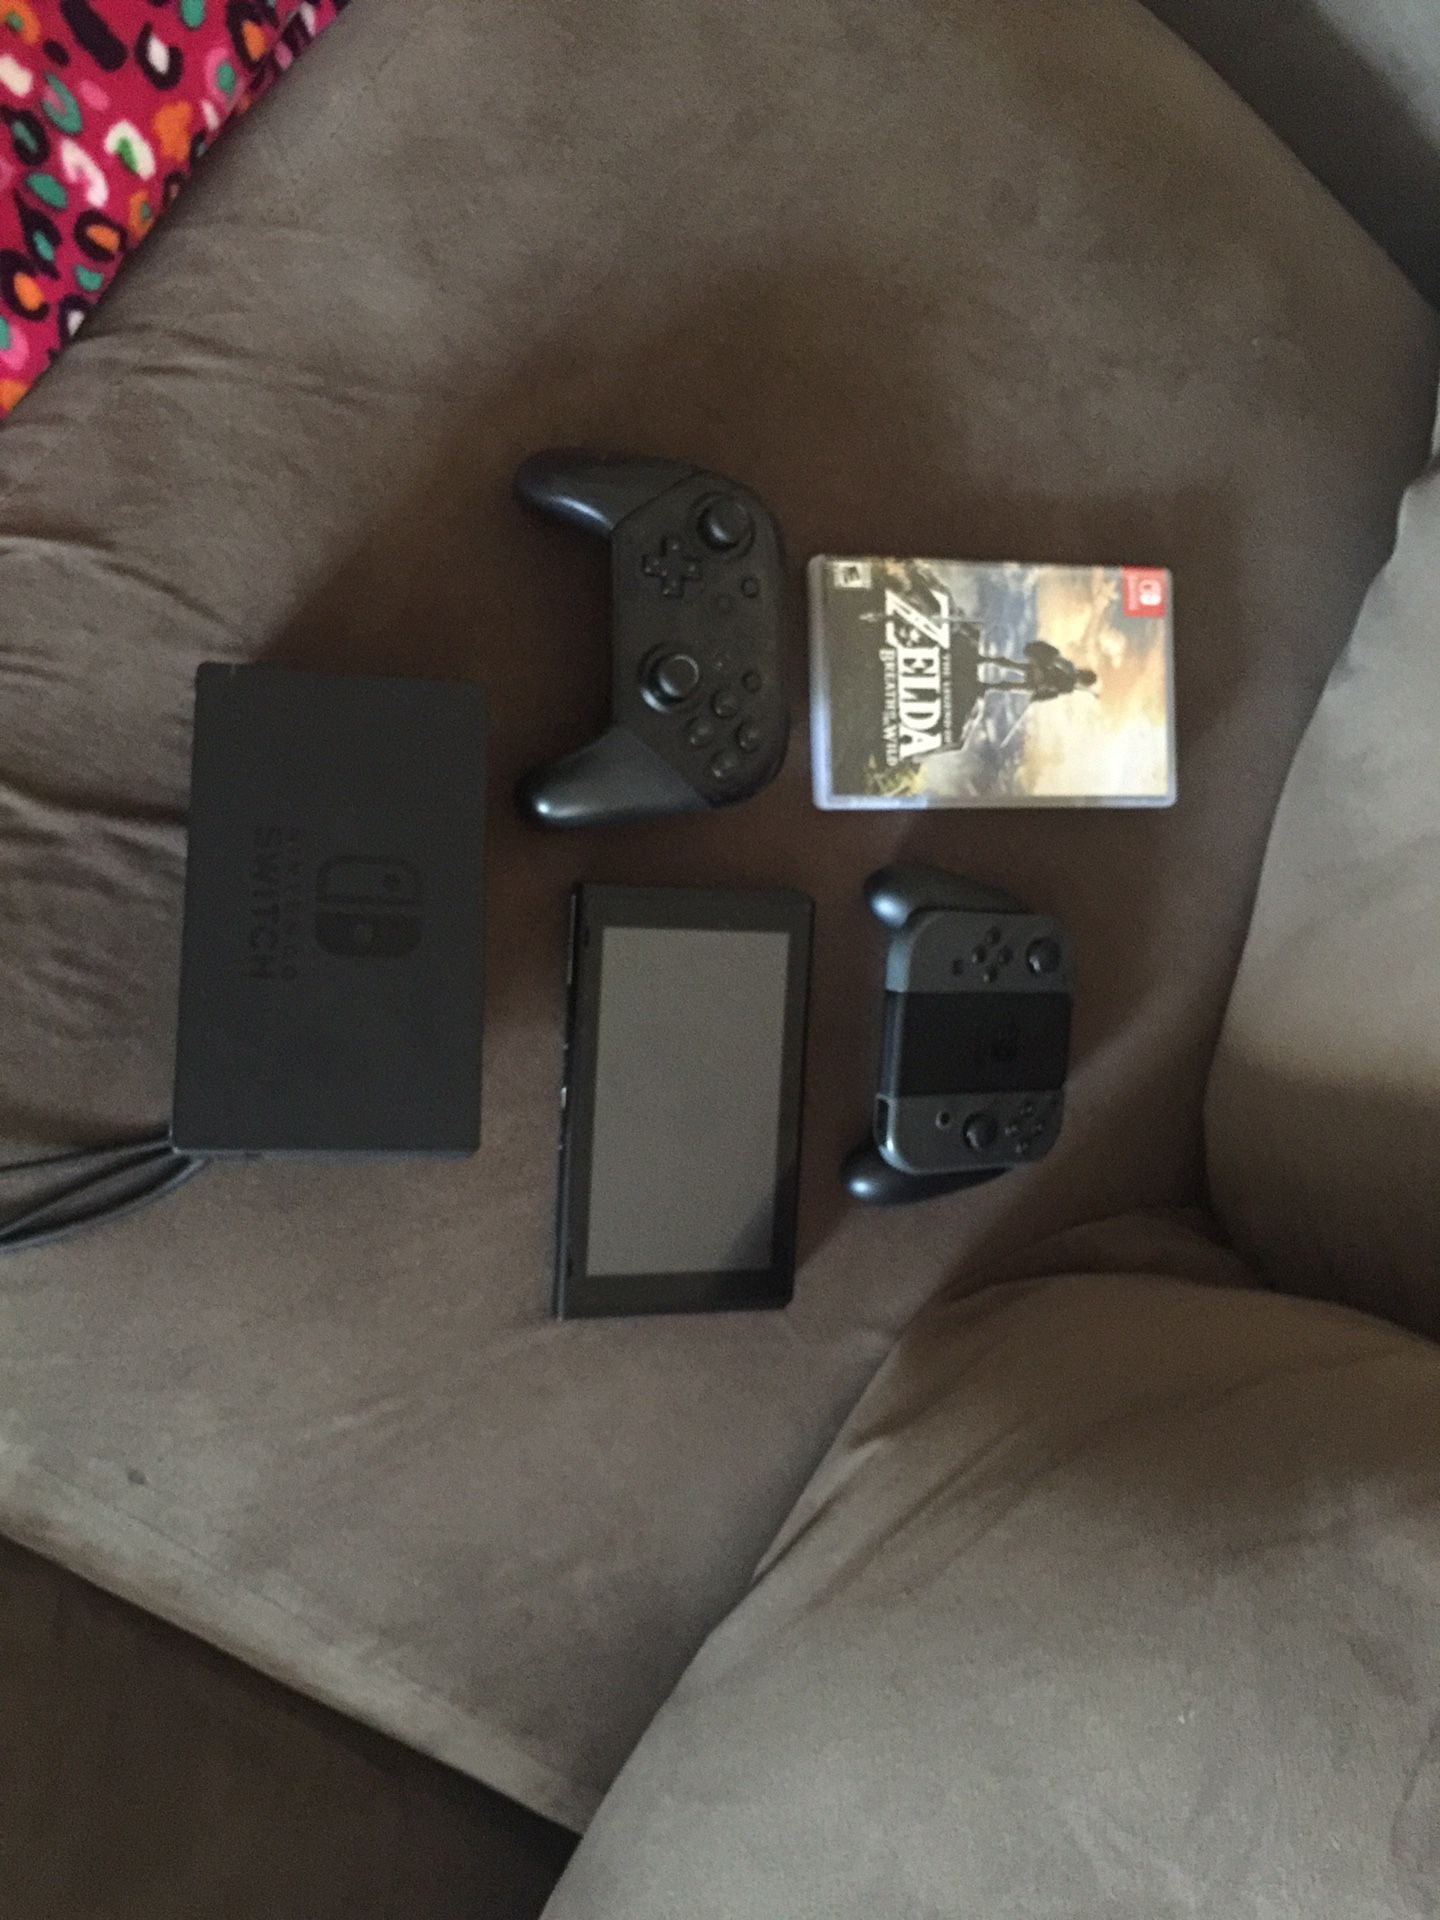 Nintendo switch and dock pro controller and legend of Zelda. More games on my account